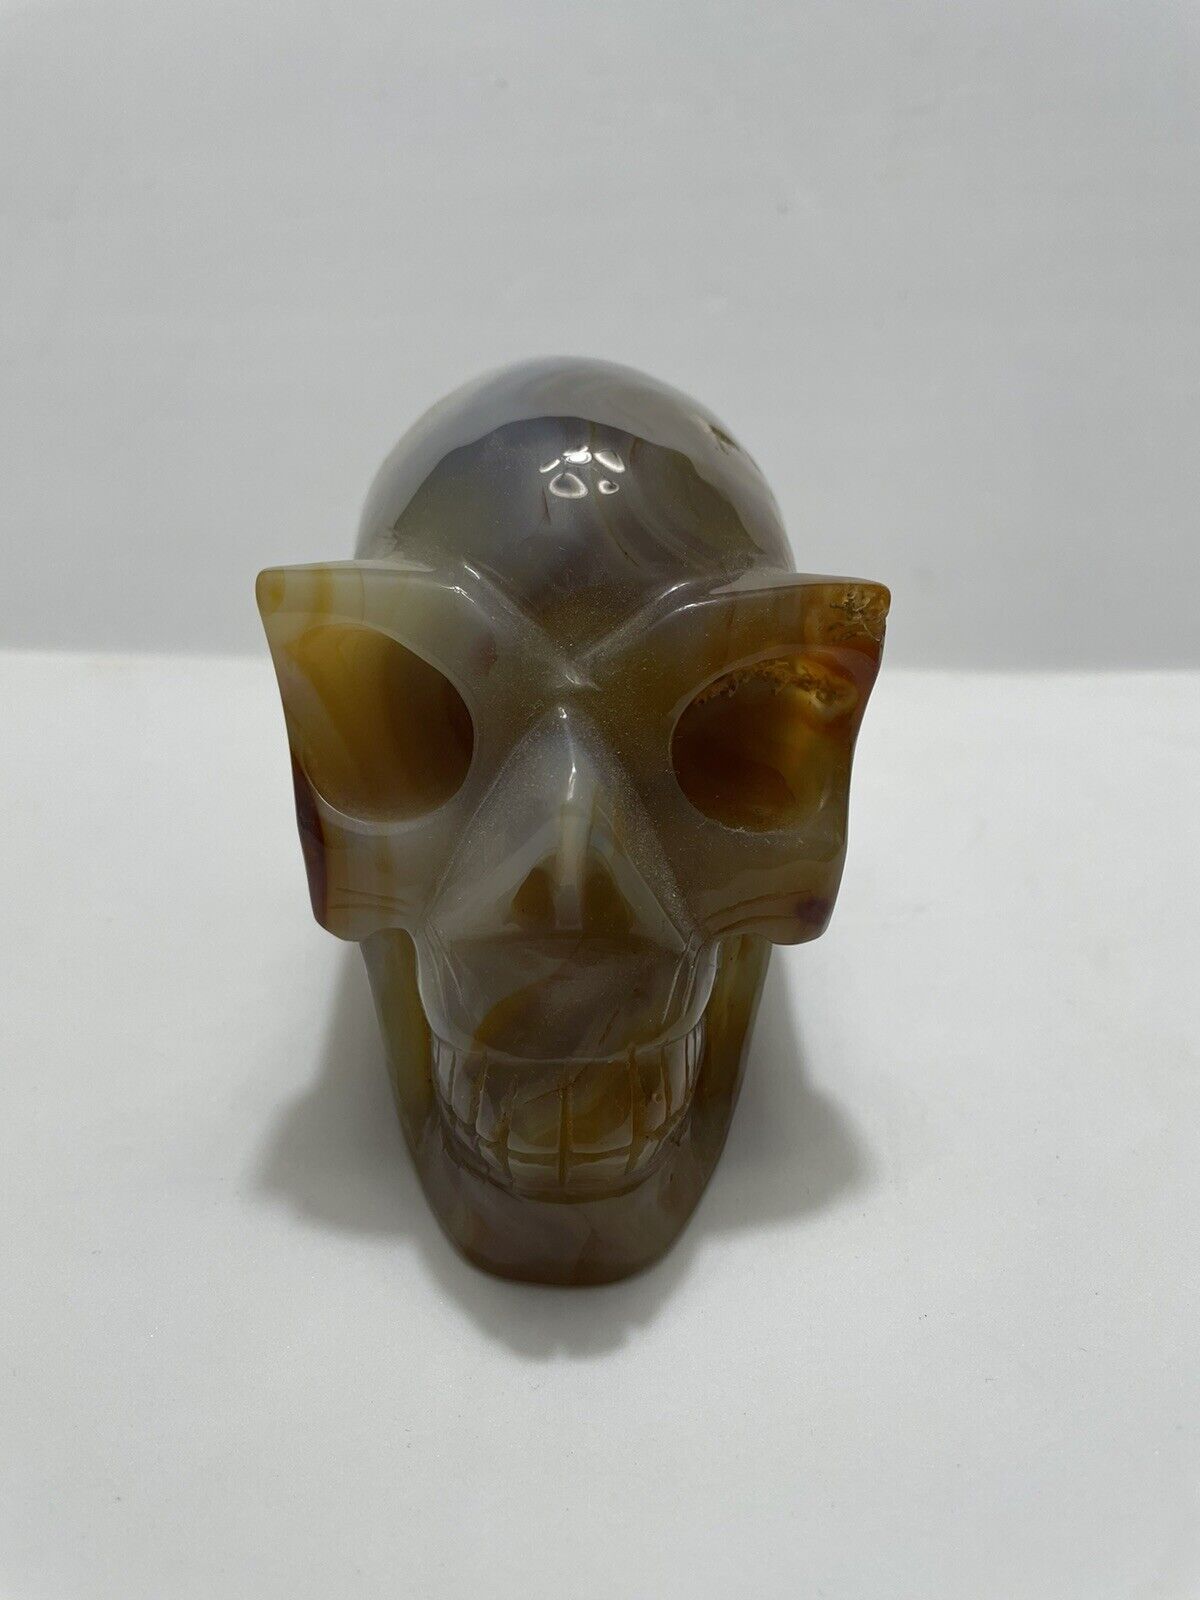 Carnelian 2.5 Lb. Alien Skull, Gorgeous Inclusions And Colors